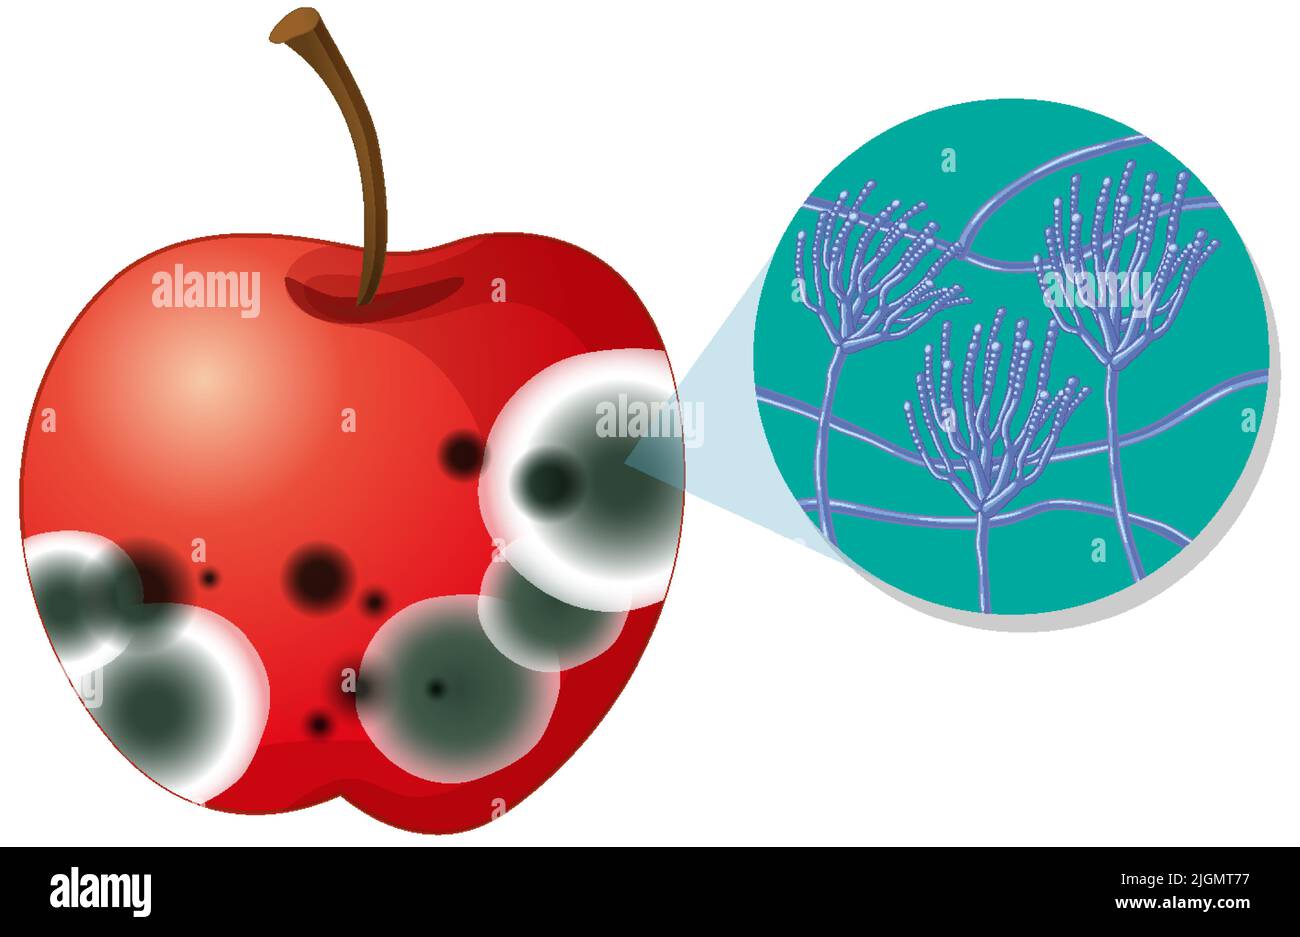 Inedible decomposed apple with mould illustration Stock Vector